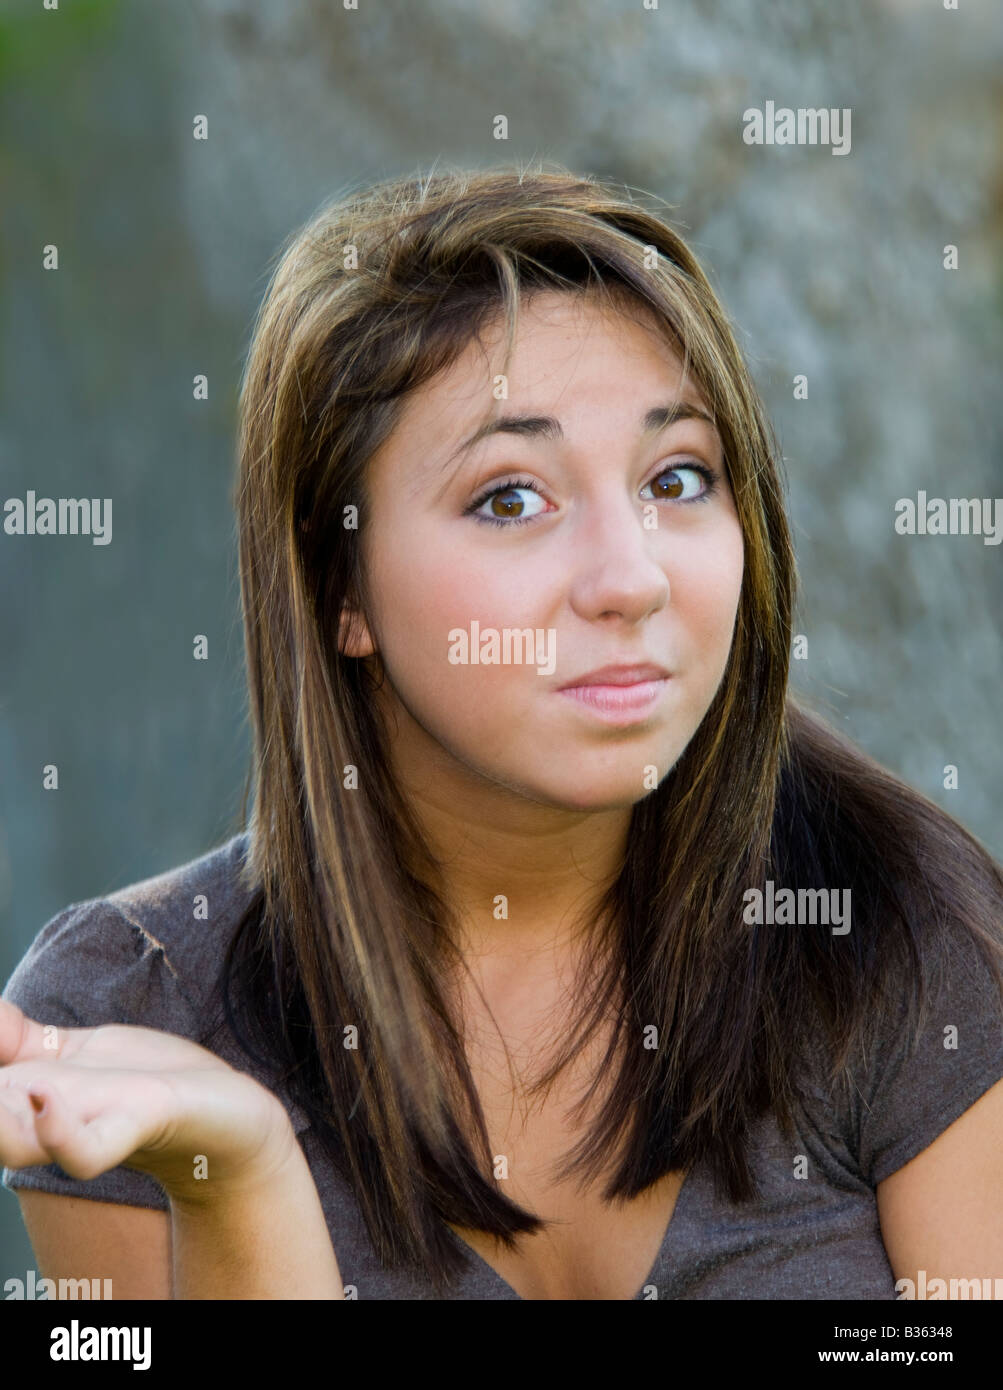 A 16 year old pretty caucasian girl, brown hair, brown eyes, shrugs and gestures. Conceptual image. Stock Photo